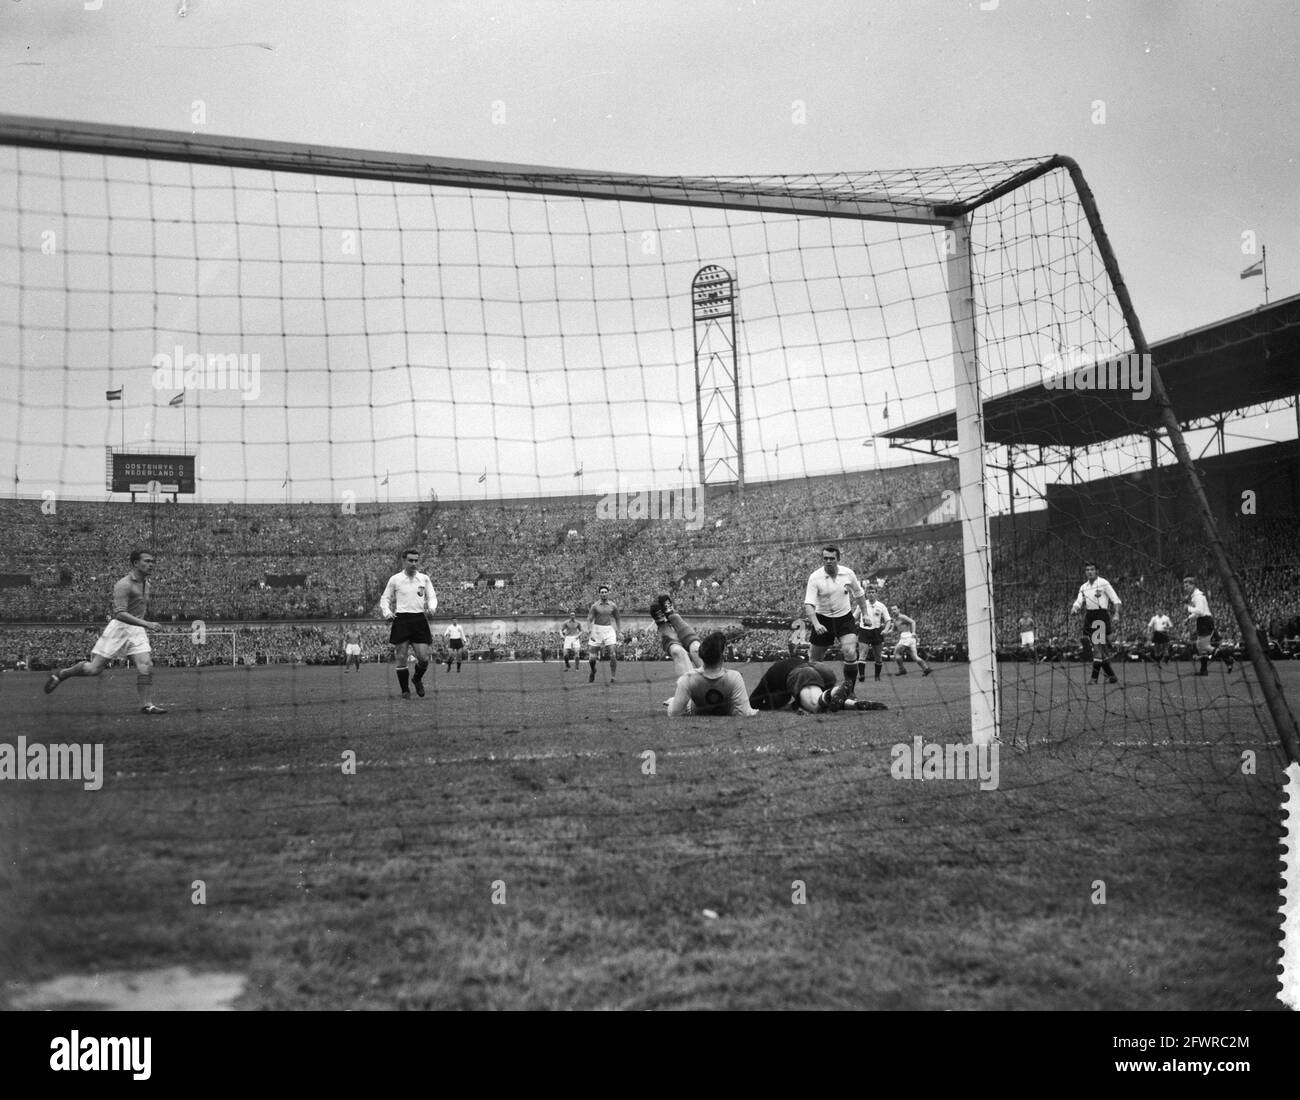 Netherlands against Austria 1-1, moment of play with from left to right: Lenstra, Schmied, Happel, Hanappi, Rijvers, September 25, 1957, sports, soccer, The Netherlands, 20th century press agency photo, news to remember, documentary, historic photography 1945-1990, visual stories, human history of the Twentieth Century, capturing moments in time Stock Photo